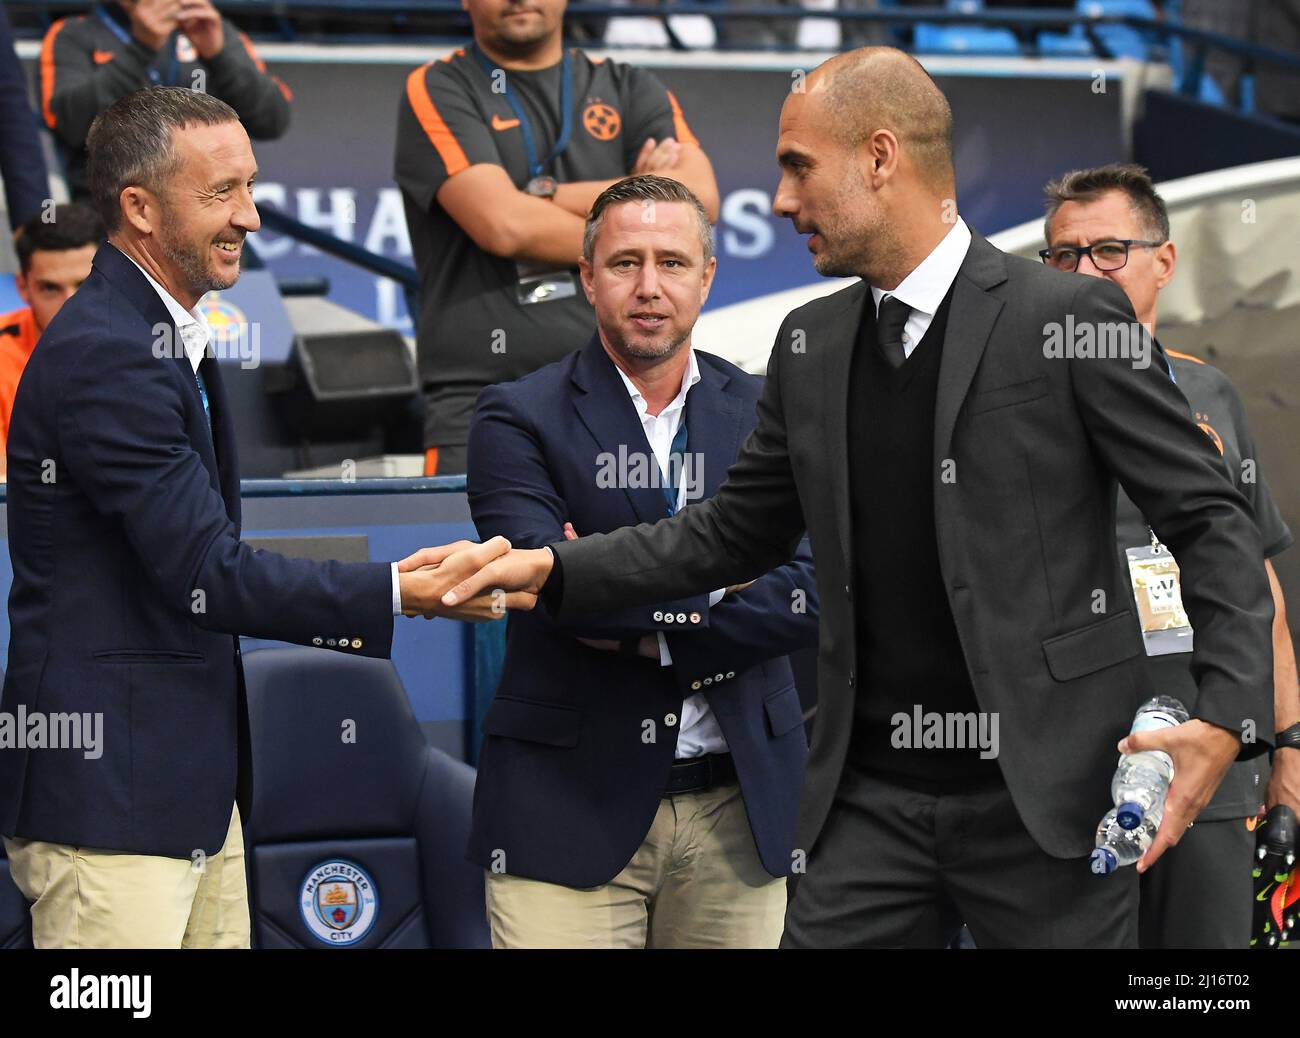 MANCHESTER, ENGLAND - AUGUST 24, 2016: City manager Josep Guardiola (R) greets FCSB official Mihai Stoica (L) prior to the second leg of the 2016/17 UEFA Champions League tie between Manchester City (Engalnd) and FCSB (Romania) at Etihad Stadium. Copyright: Cosmin Iftode/Picstaff Stock Photo